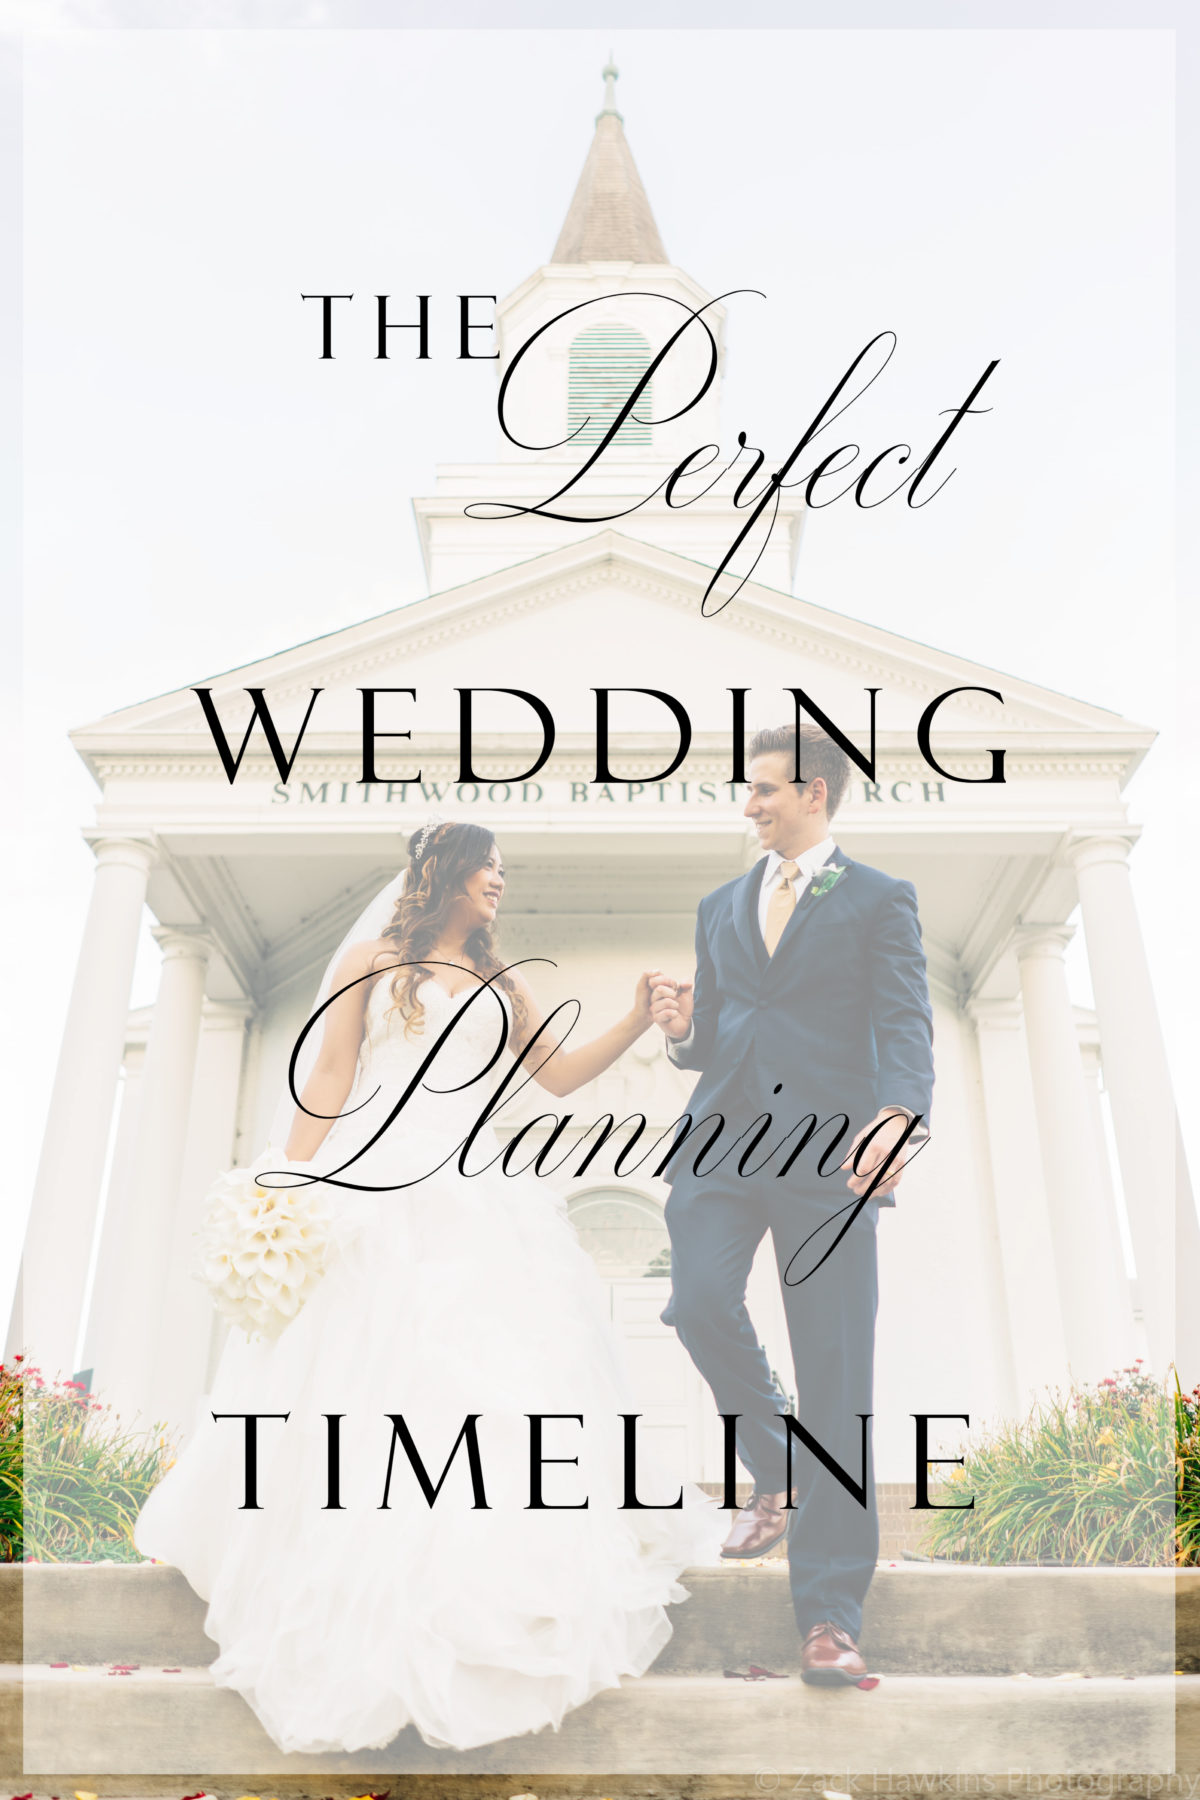 The perfect wedding planning timeline